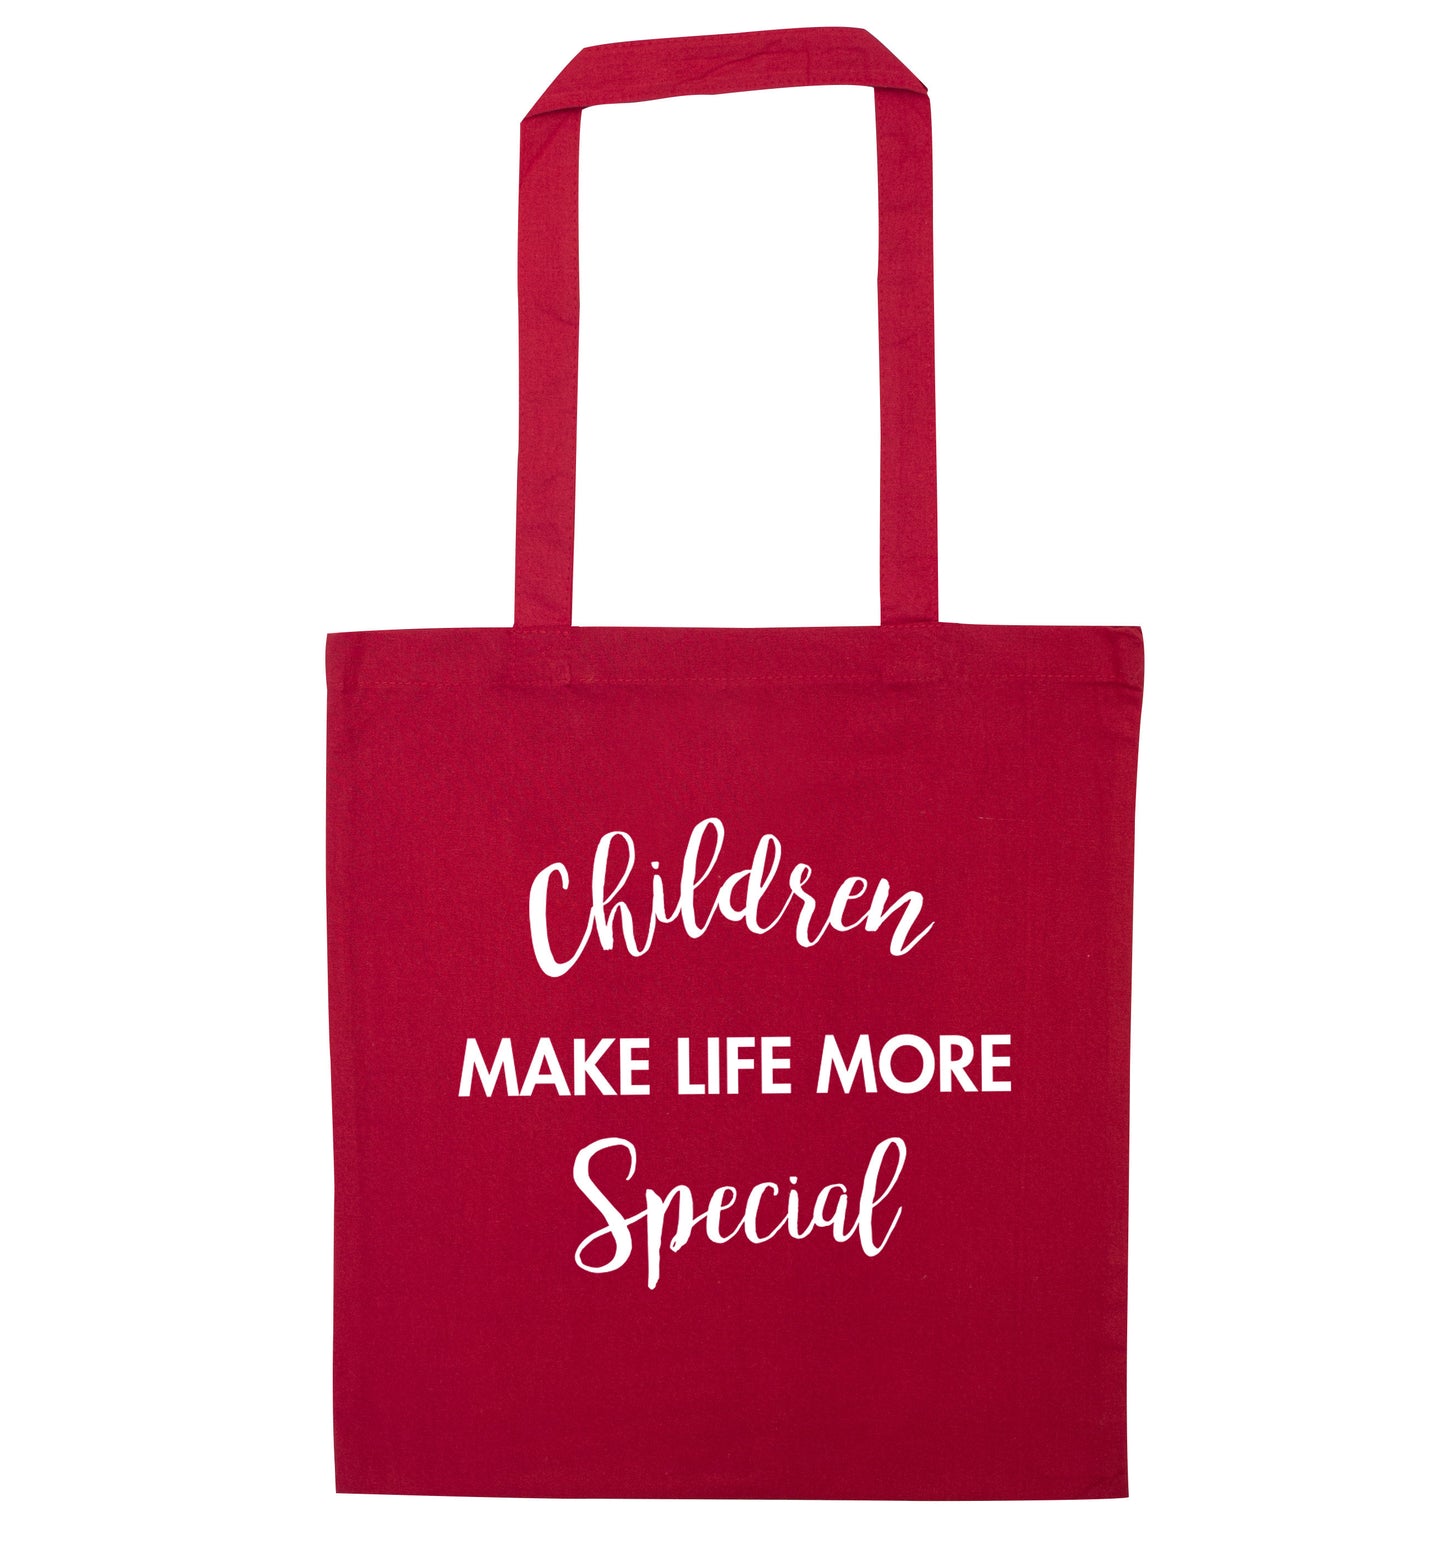 Children make life more special red tote bag